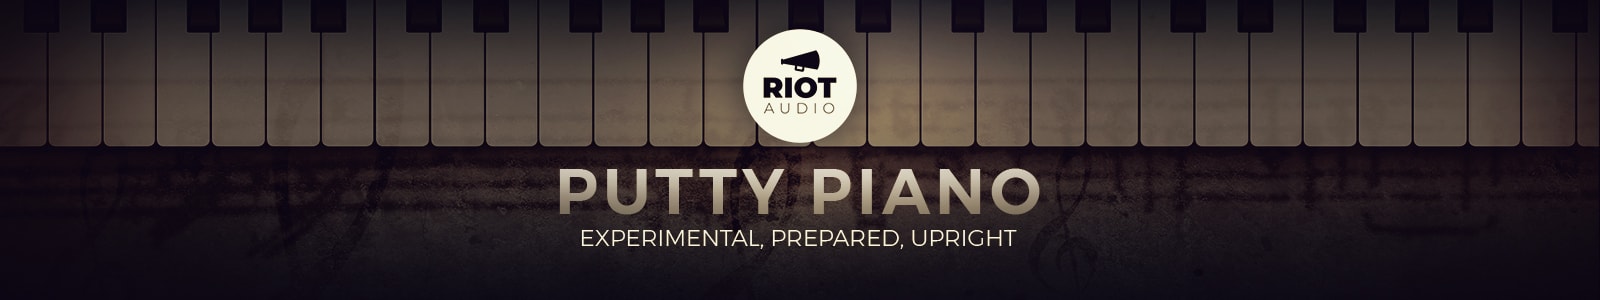 putty piano by riot audio